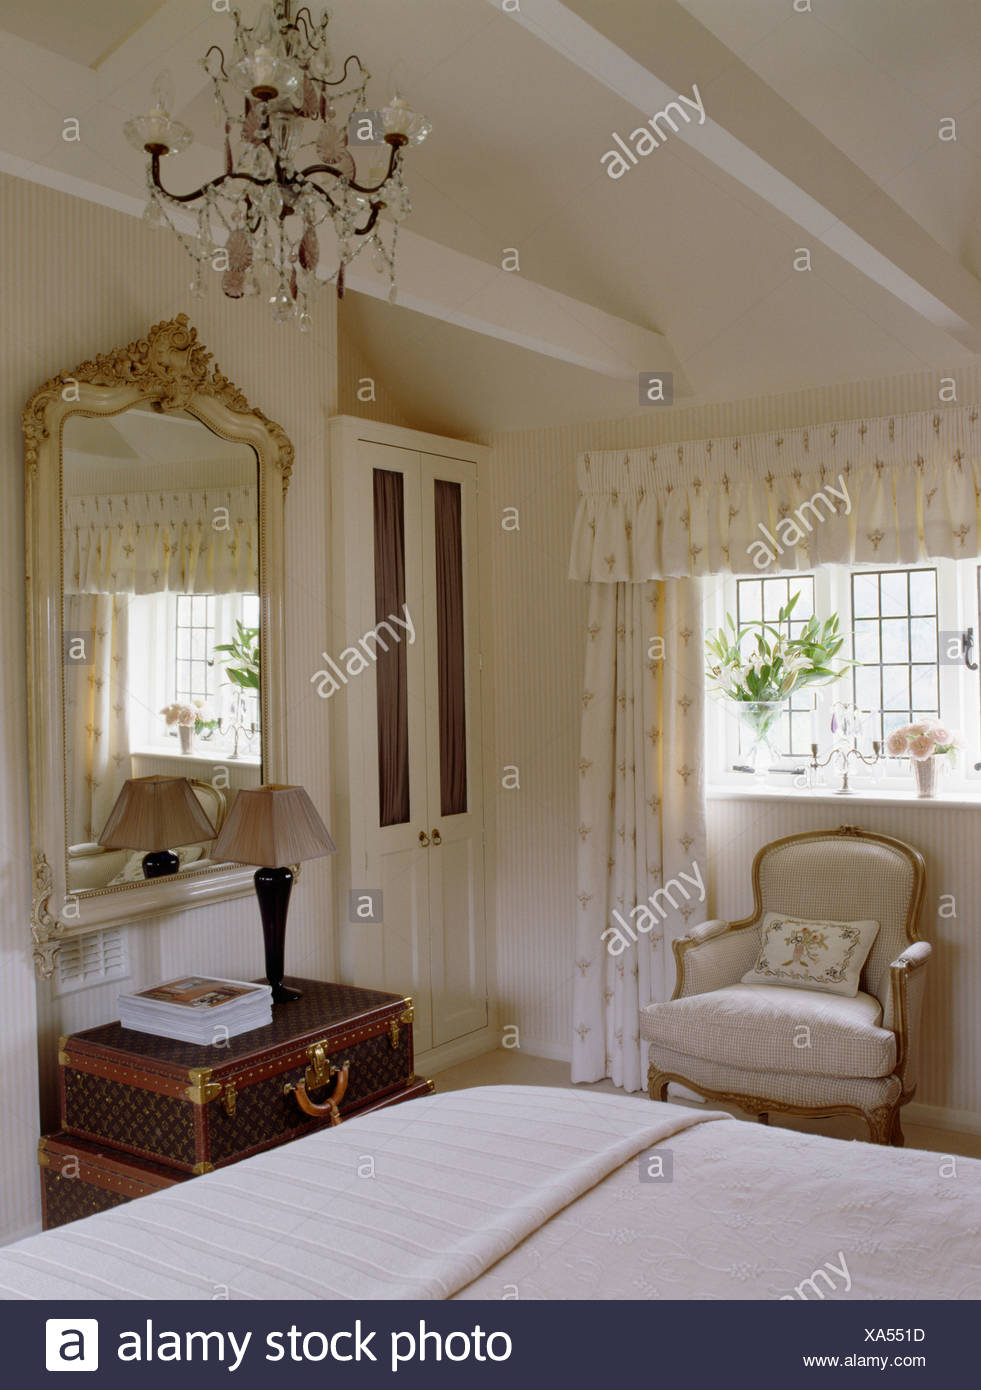 Chandelier And Apex Ceiling In Cream Country Bedroom With